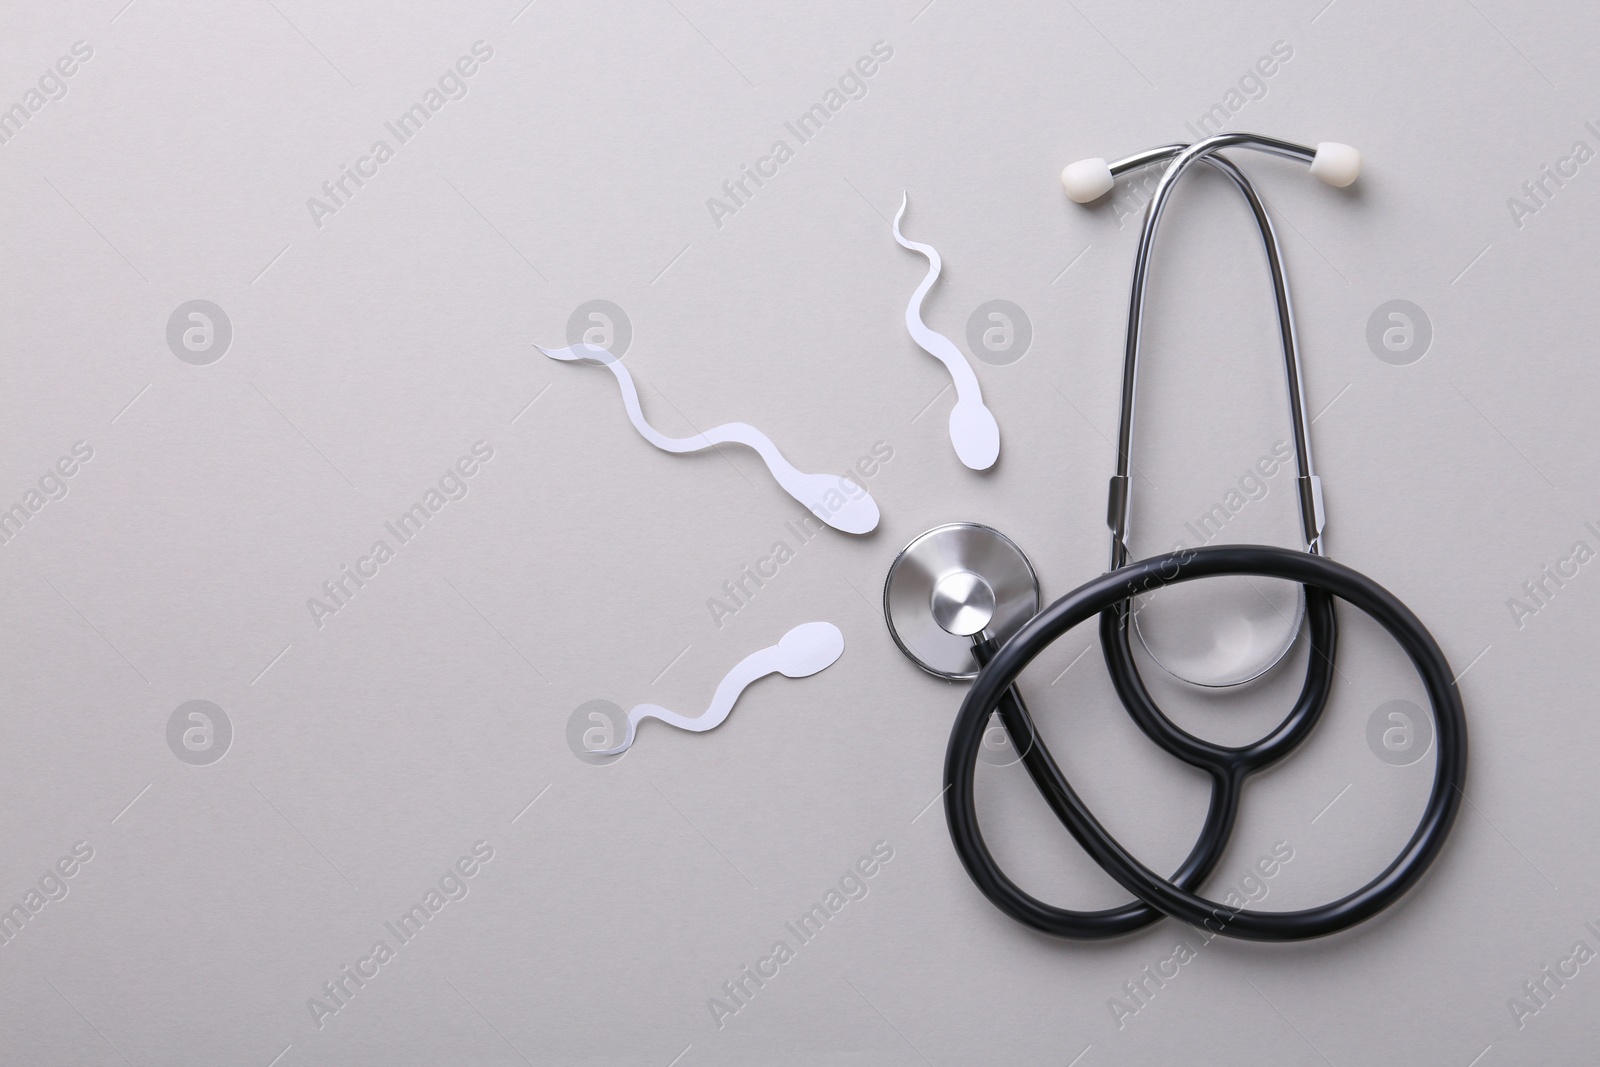 Photo of Reproductive medicine. Figures of sperm cells and stethoscope on gray background, flat lay with space for text